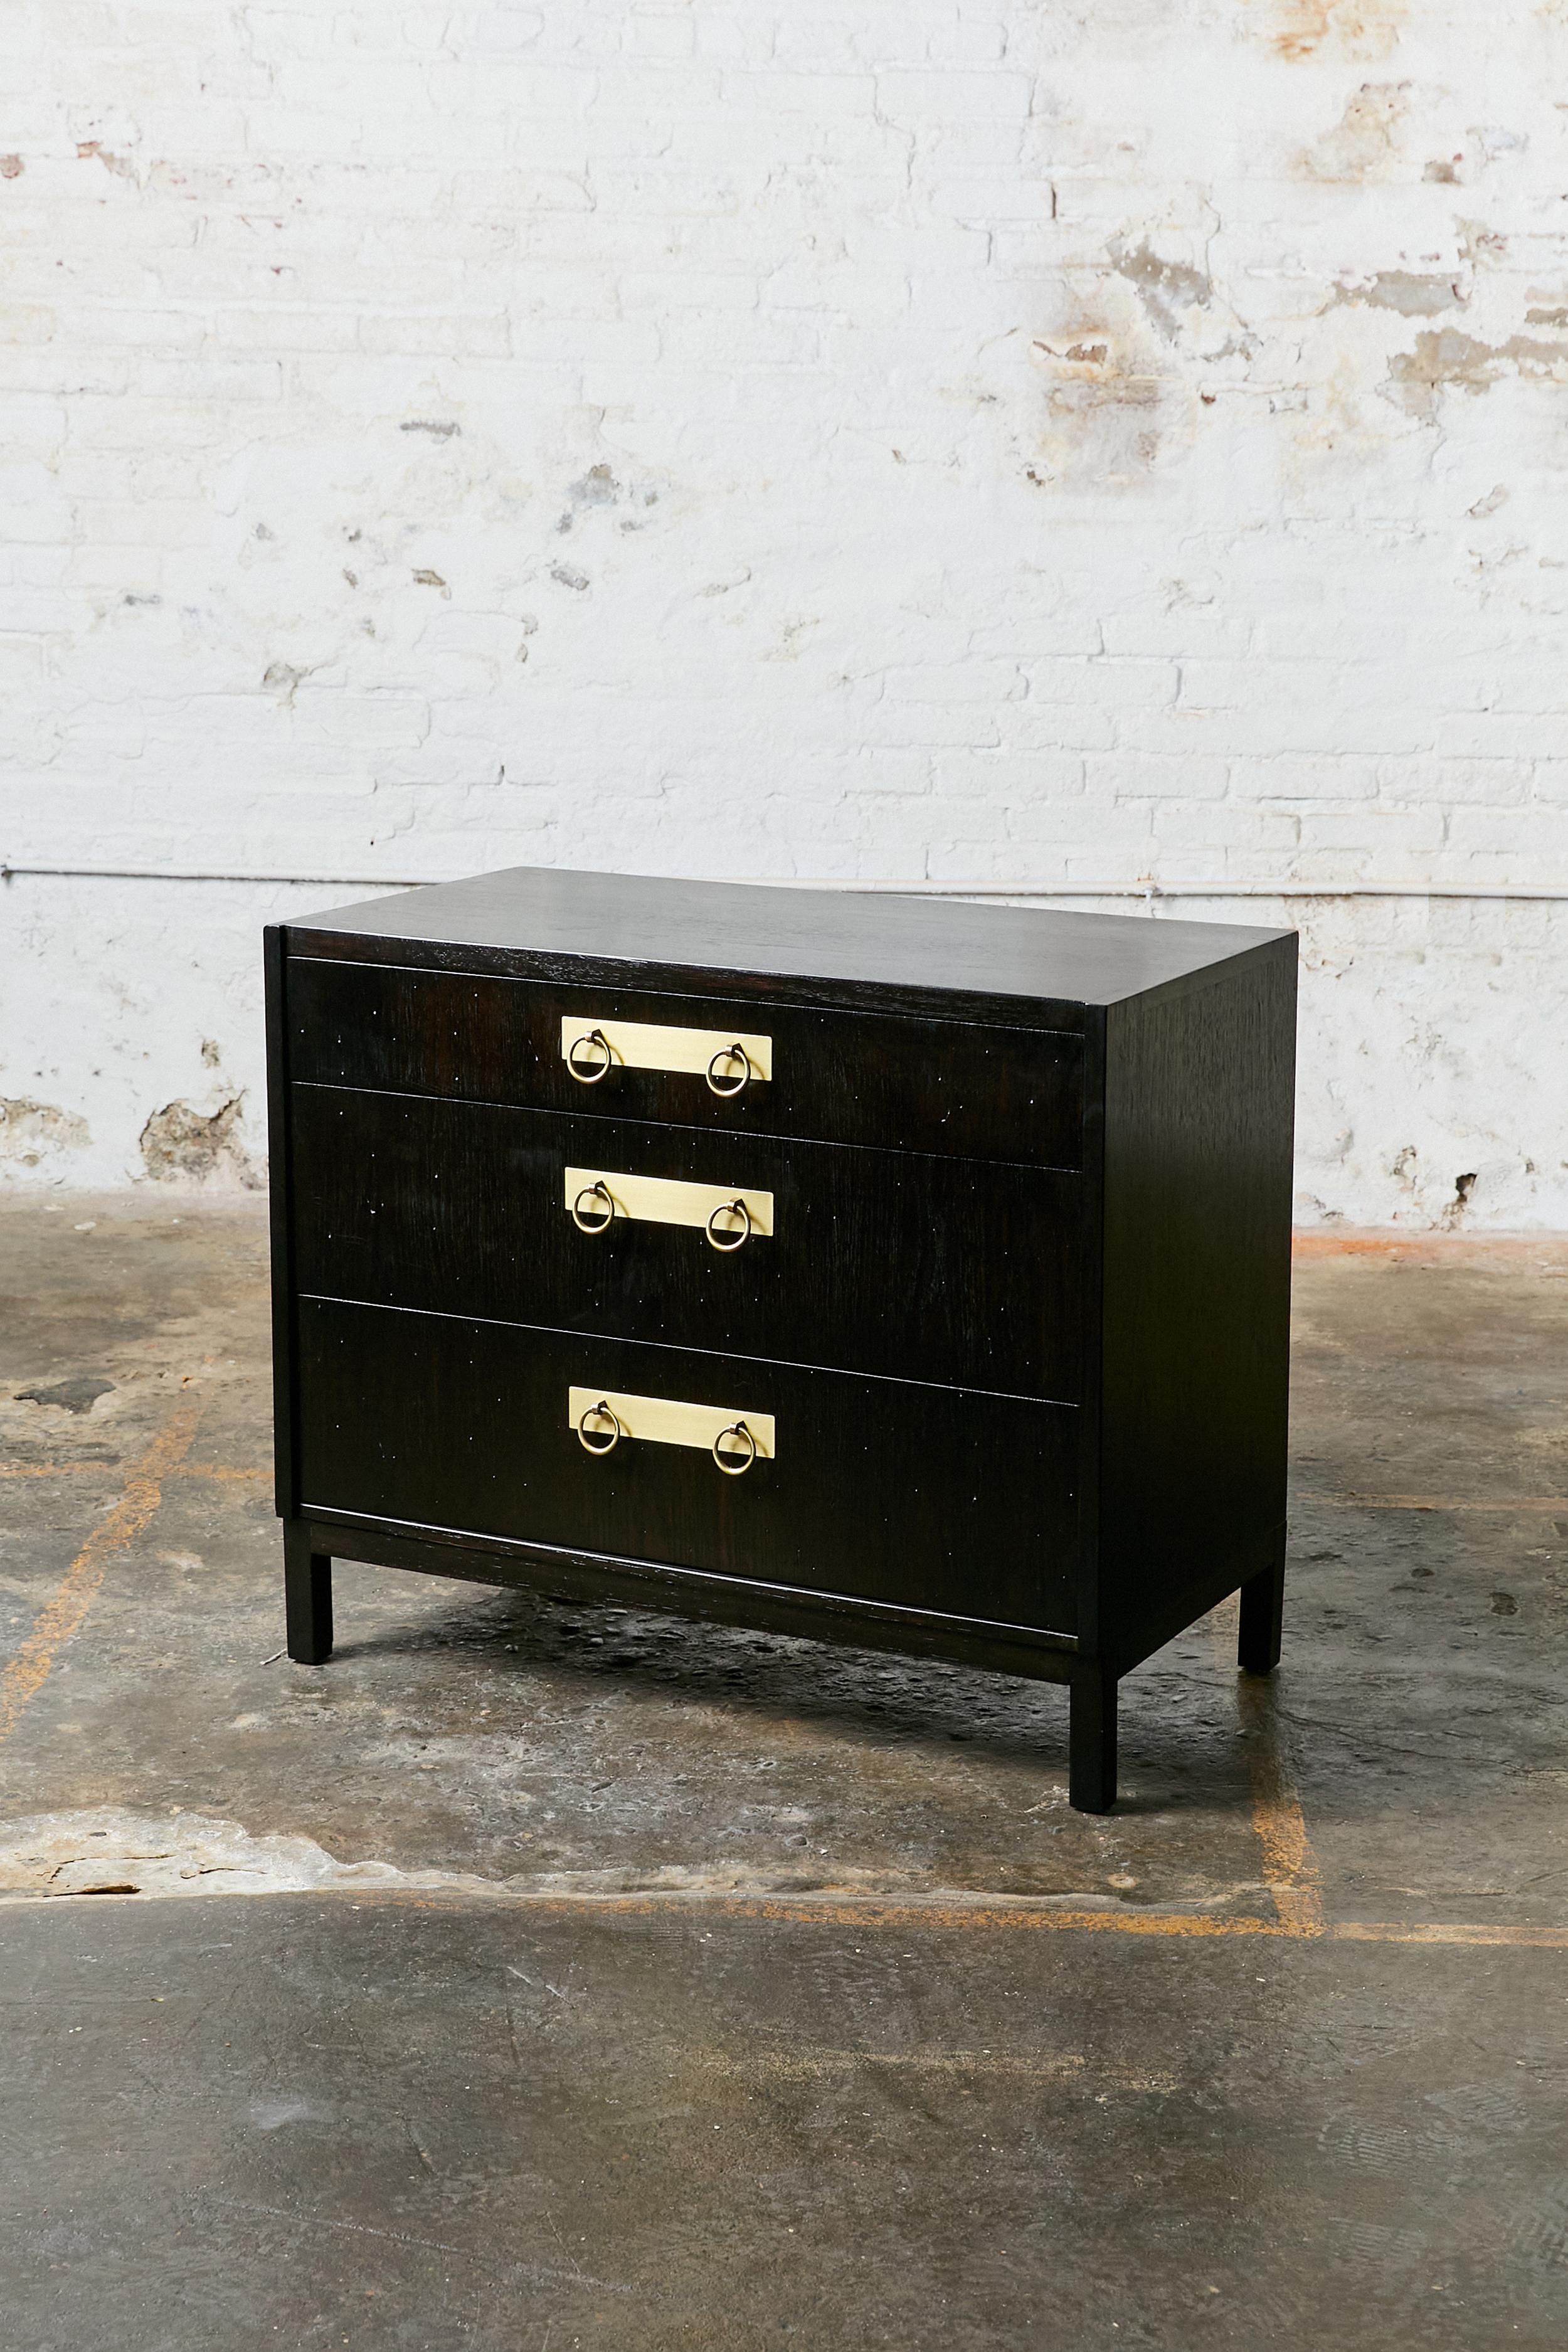 Drexel modernist three drawer dresser chest. Walnut cabinet with pull rings sitting on a brass plates. Fully re-finished. All drawers come with removable lining covered in faux suede.